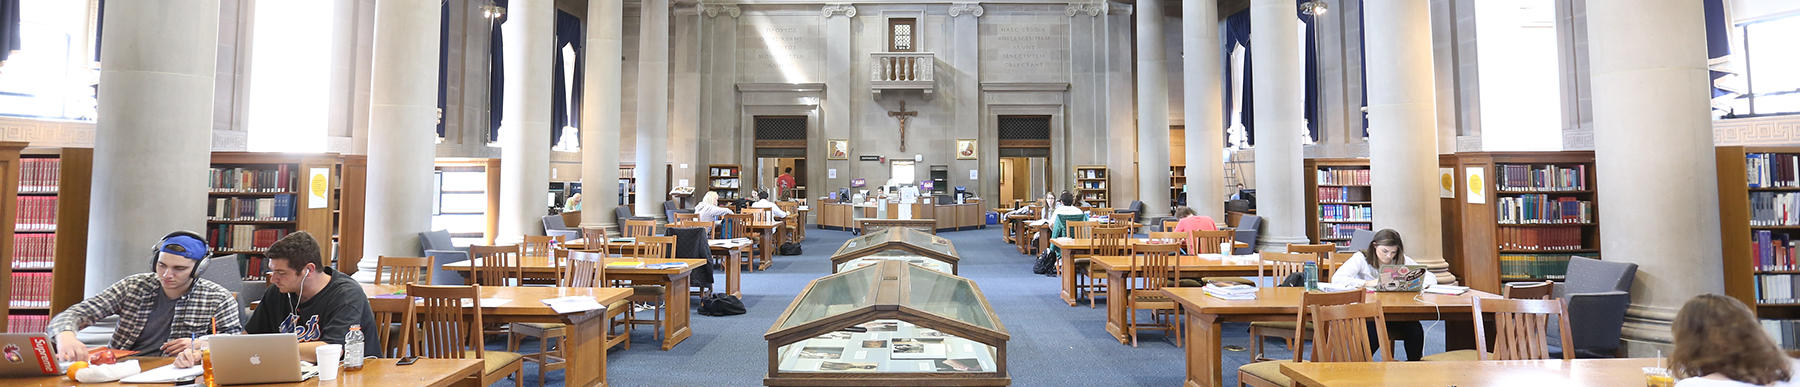 inside the dinand main reading room. students sitting at tables working